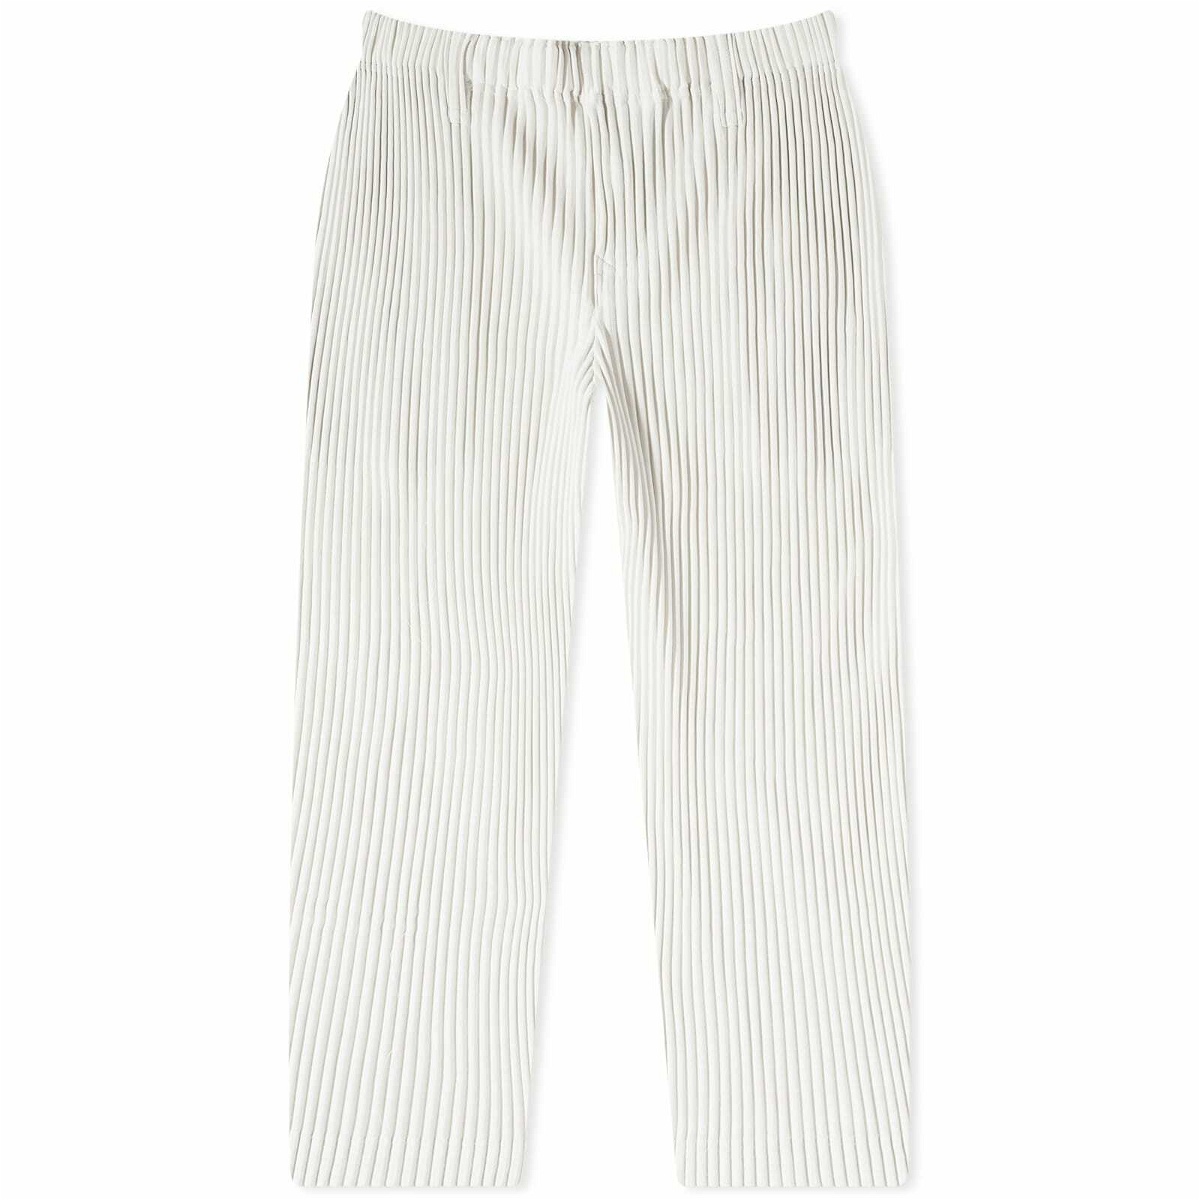 Homme Plissé Issey Miyake Men's Straight Leg JF194 Pant in Ivory Homme ...